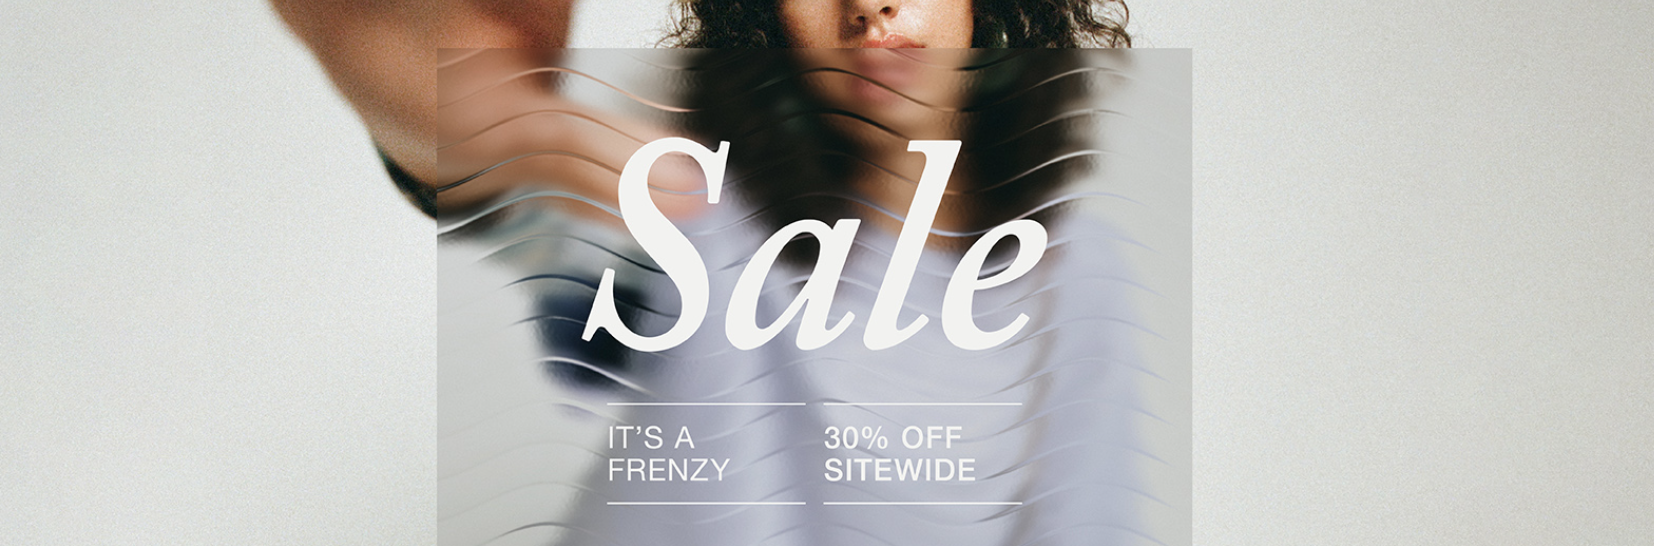 Lee Jeans Click Frenzy Sale - 30% OFF everything sitewide